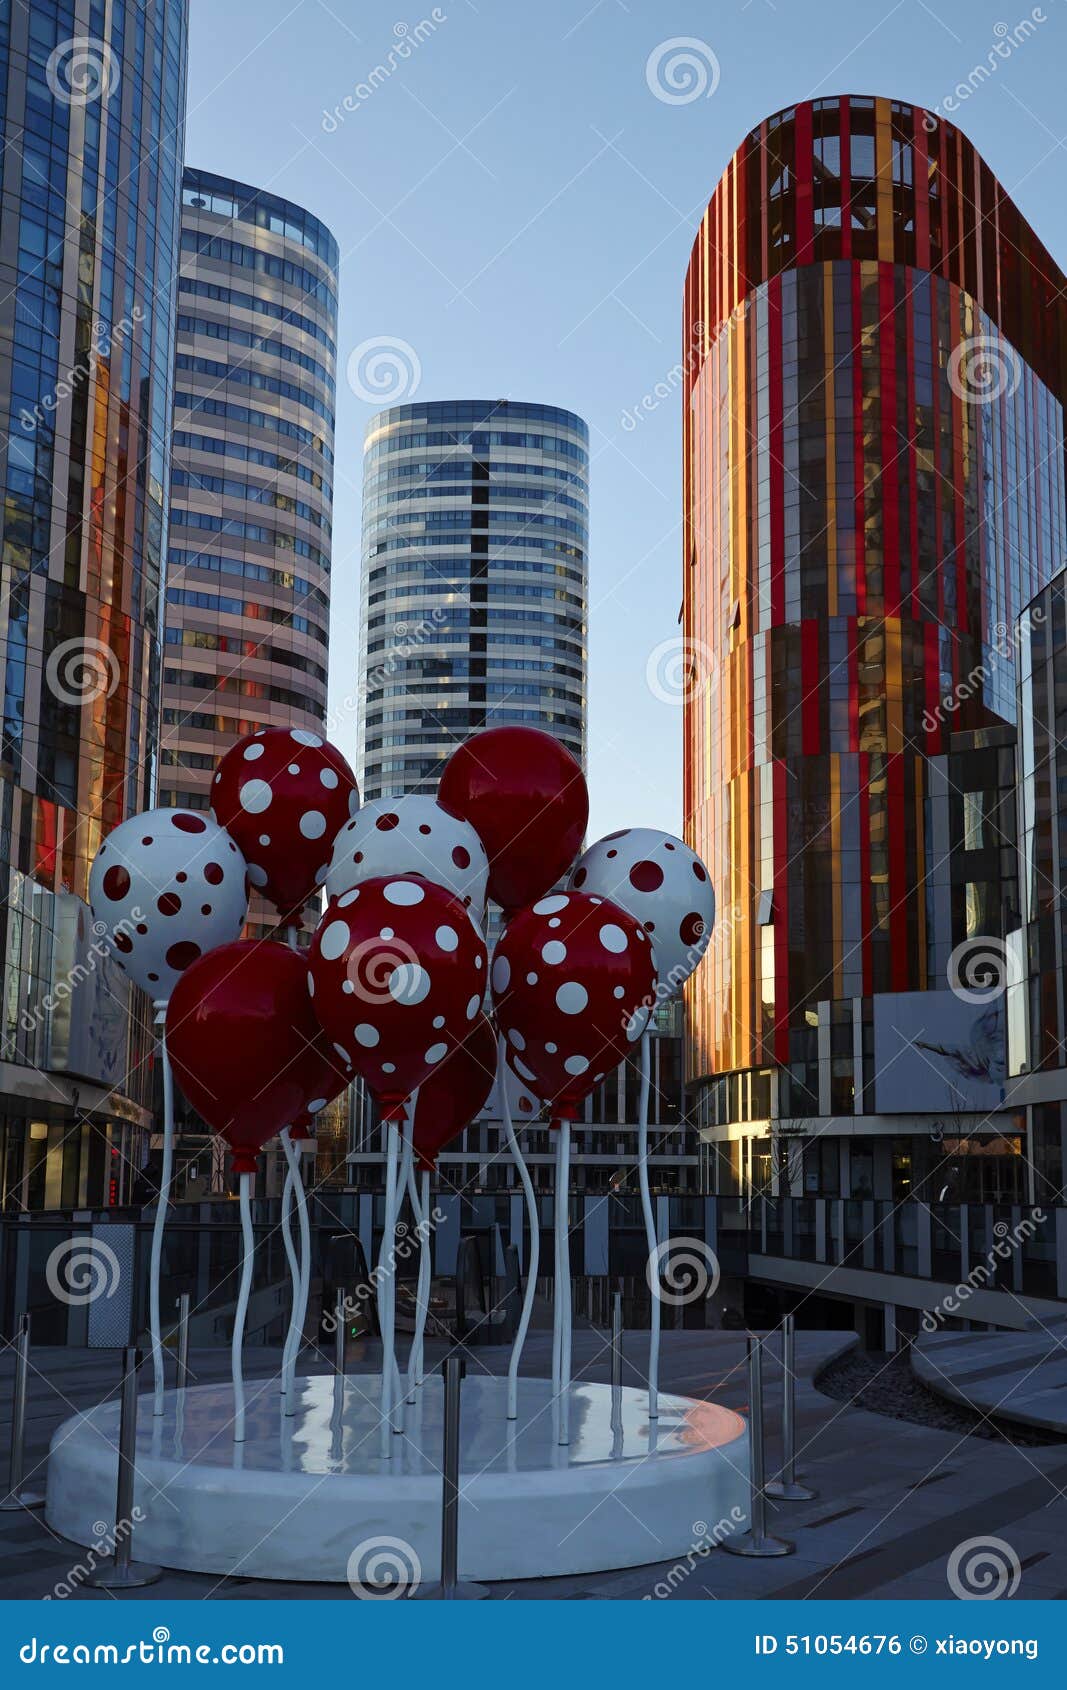 colorful plastic balloon s and office buildings